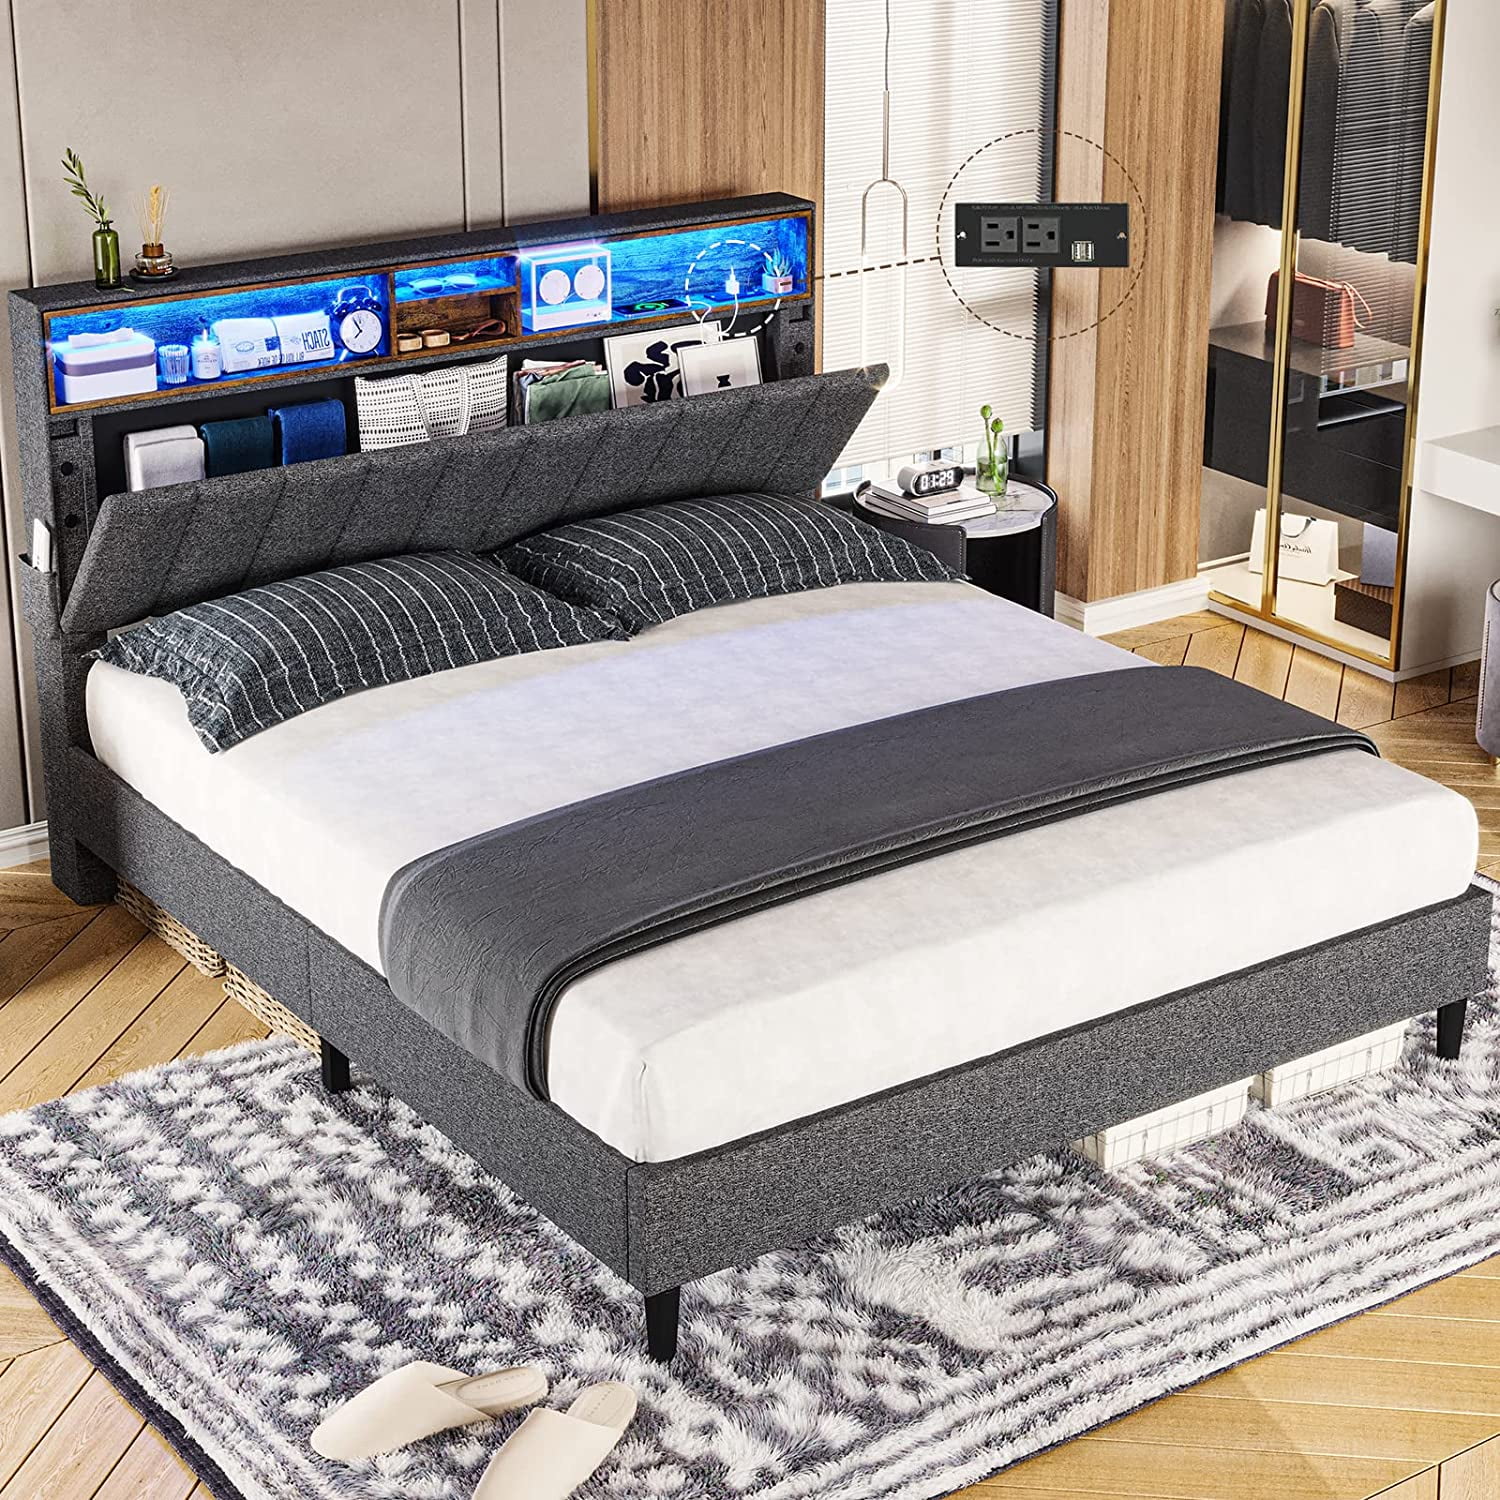 ADORNEVE Size LED Bed Frame with Outlet and USB Ports, Platform Frame with Storage Headboard, Box Spring Needed, Dark Grey - Walmart.com